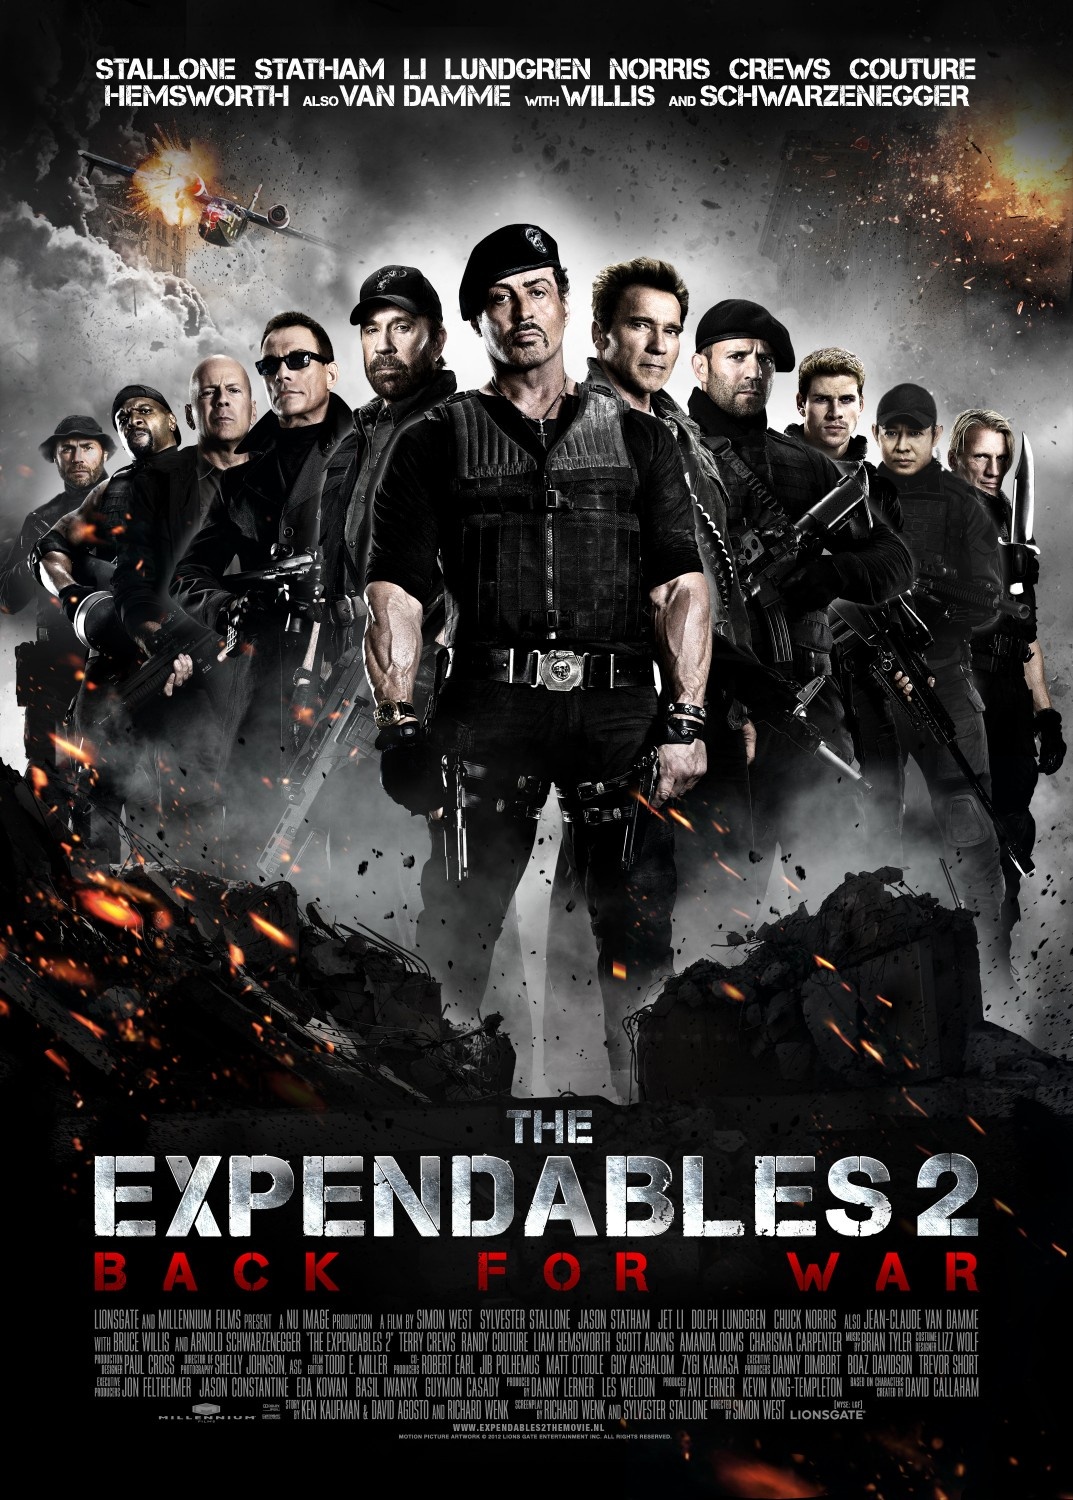 Amazoncom: The Expendables: Sylvester Stallone, Jason